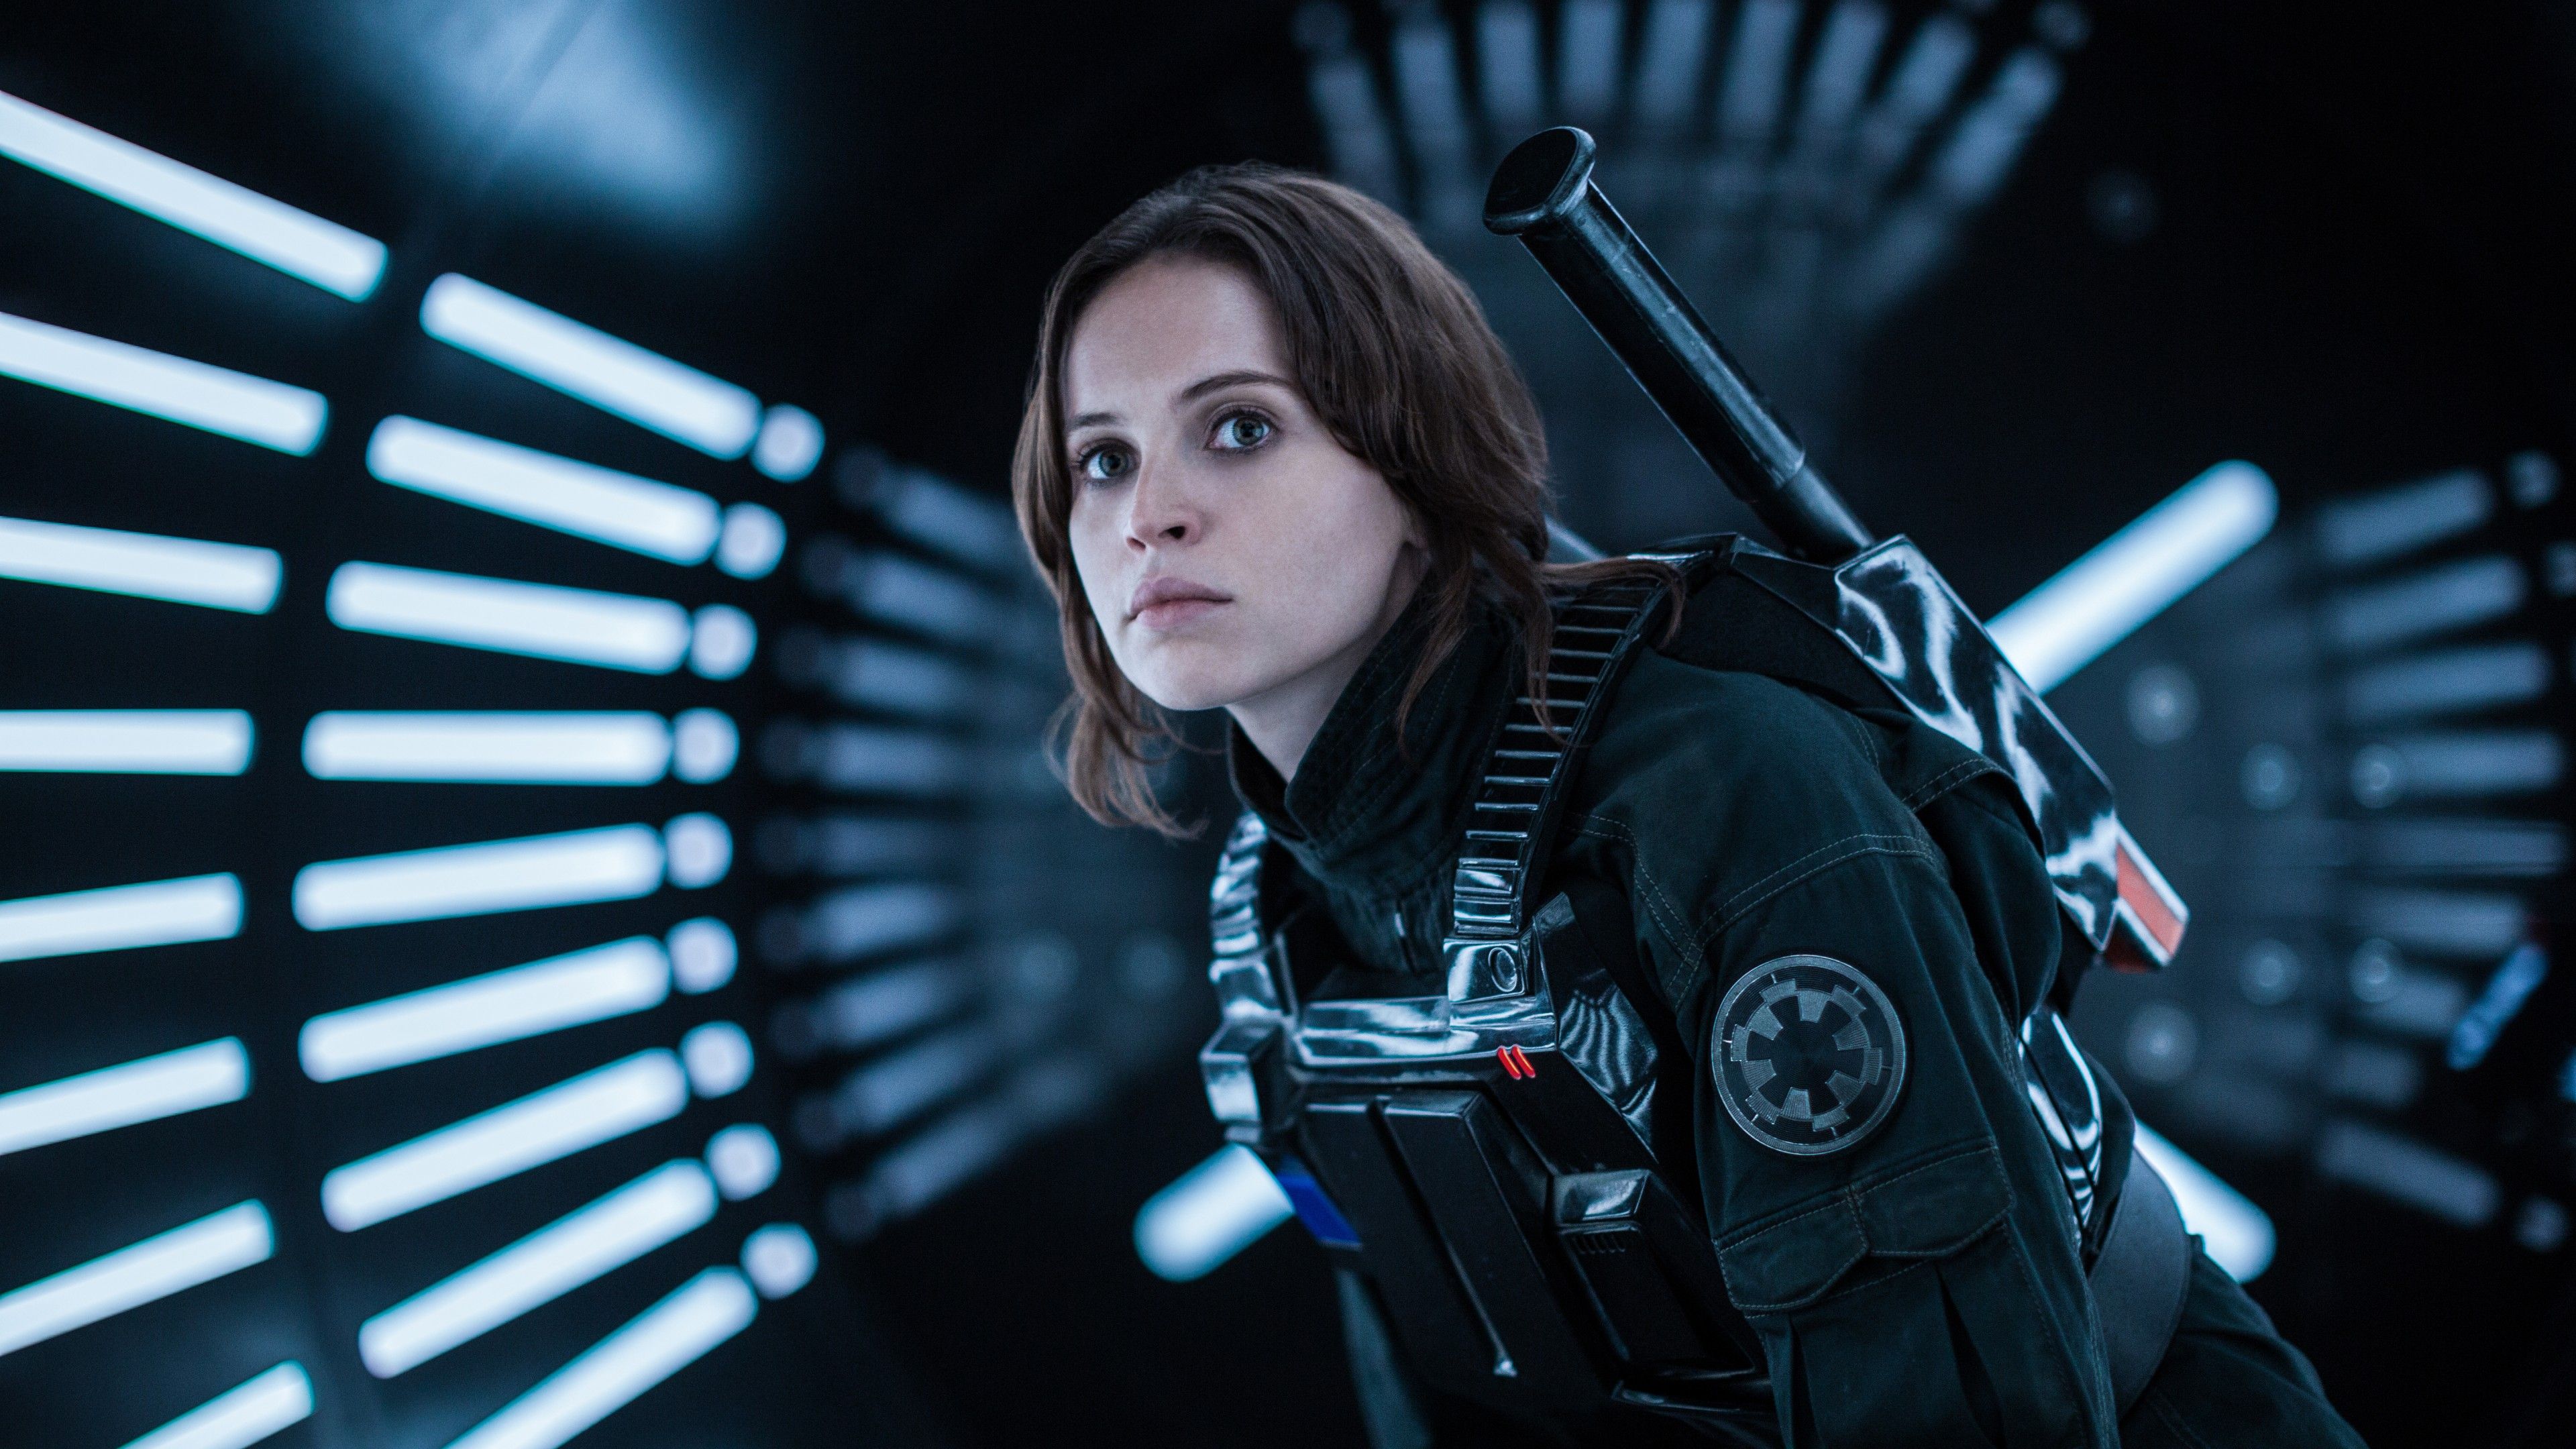 Wallpaper Felicity Jones, Jyn Erso, Rogue One: A Star Wars Story, 4K, 5K, Movies,. Wallpaper for iPhone, Android, Mobile and Desktop